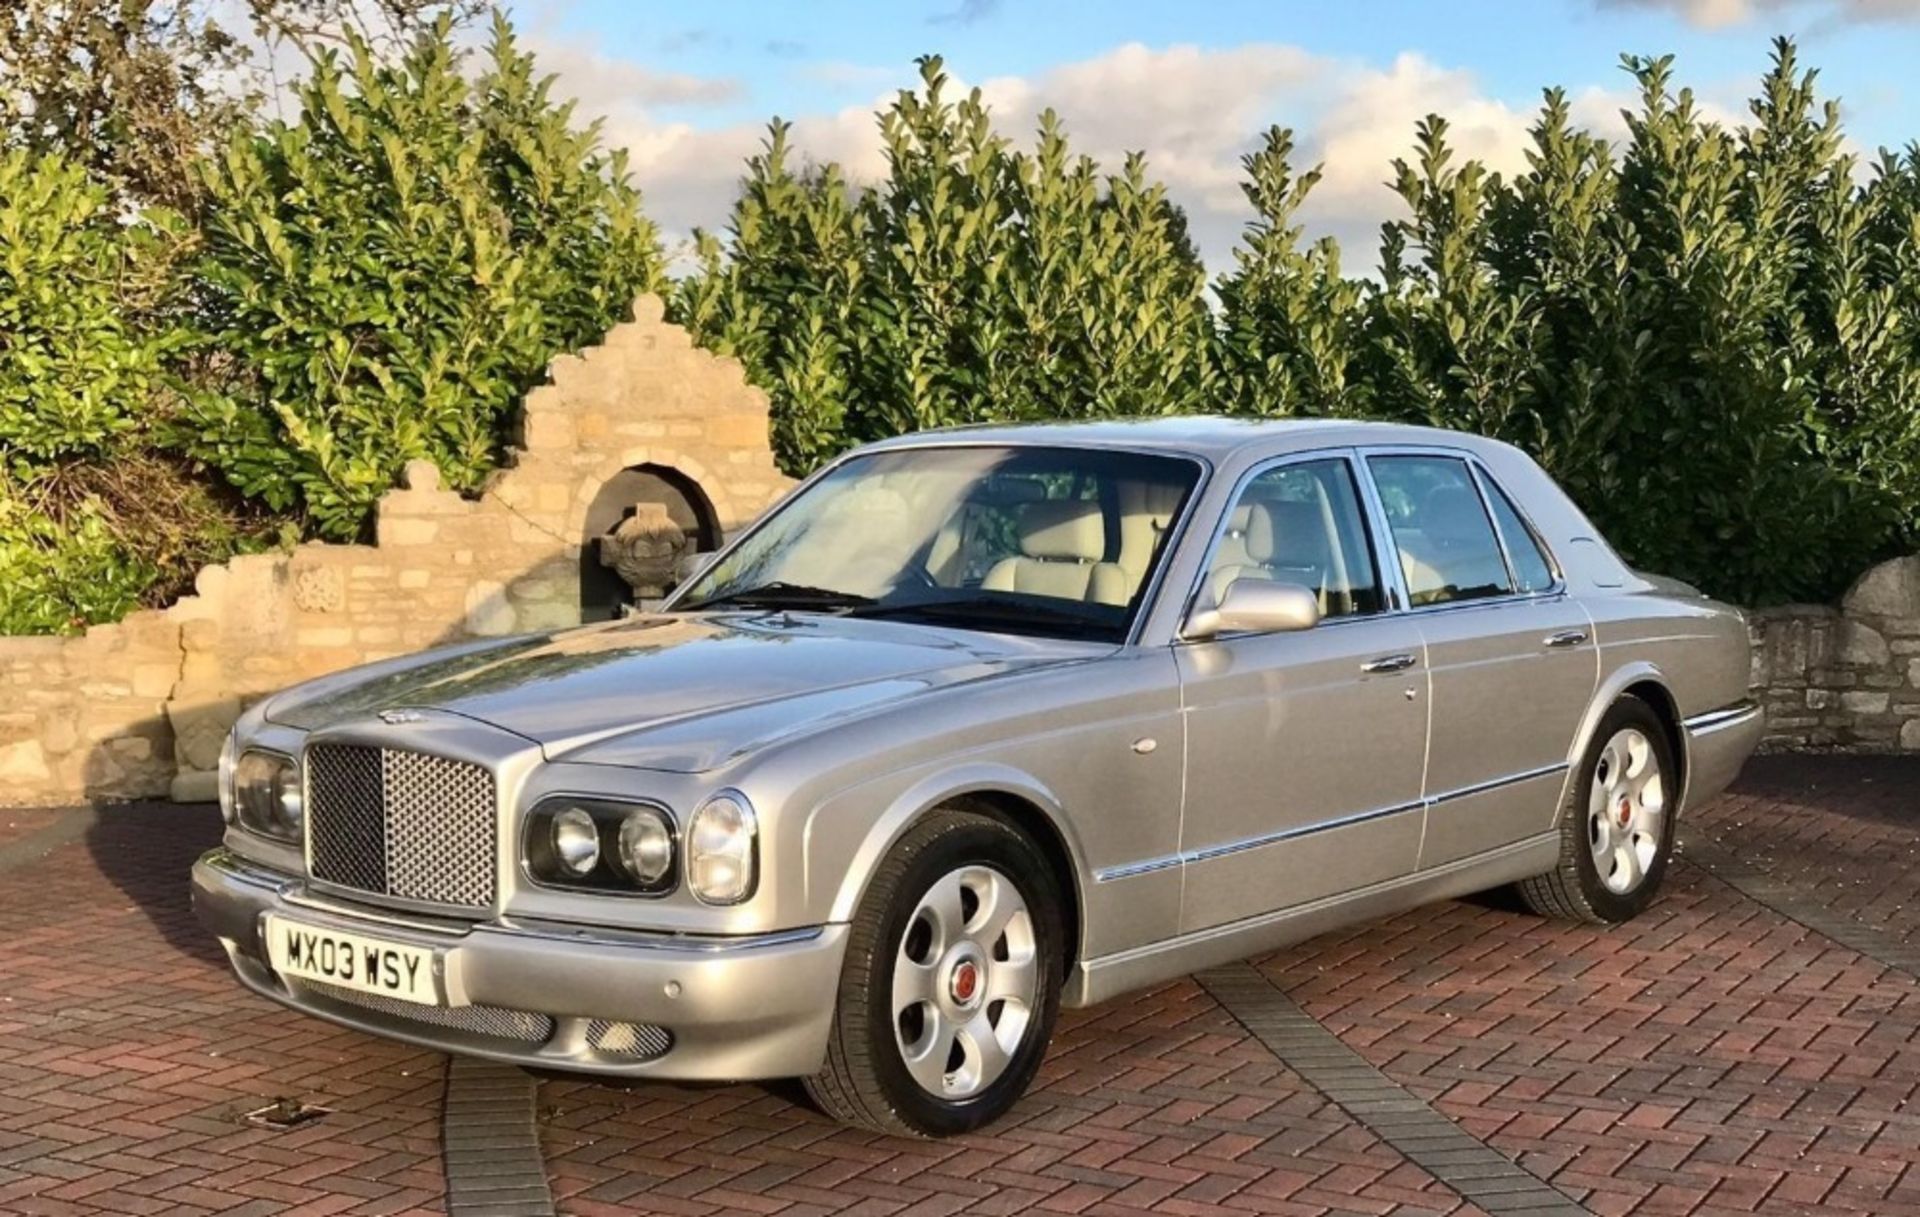 2003 BENTLEY ARNAGE R Registration Number: MX03 WSY Chassis Number: TBA Recorded Mileage: 54,214 - Image 2 of 13